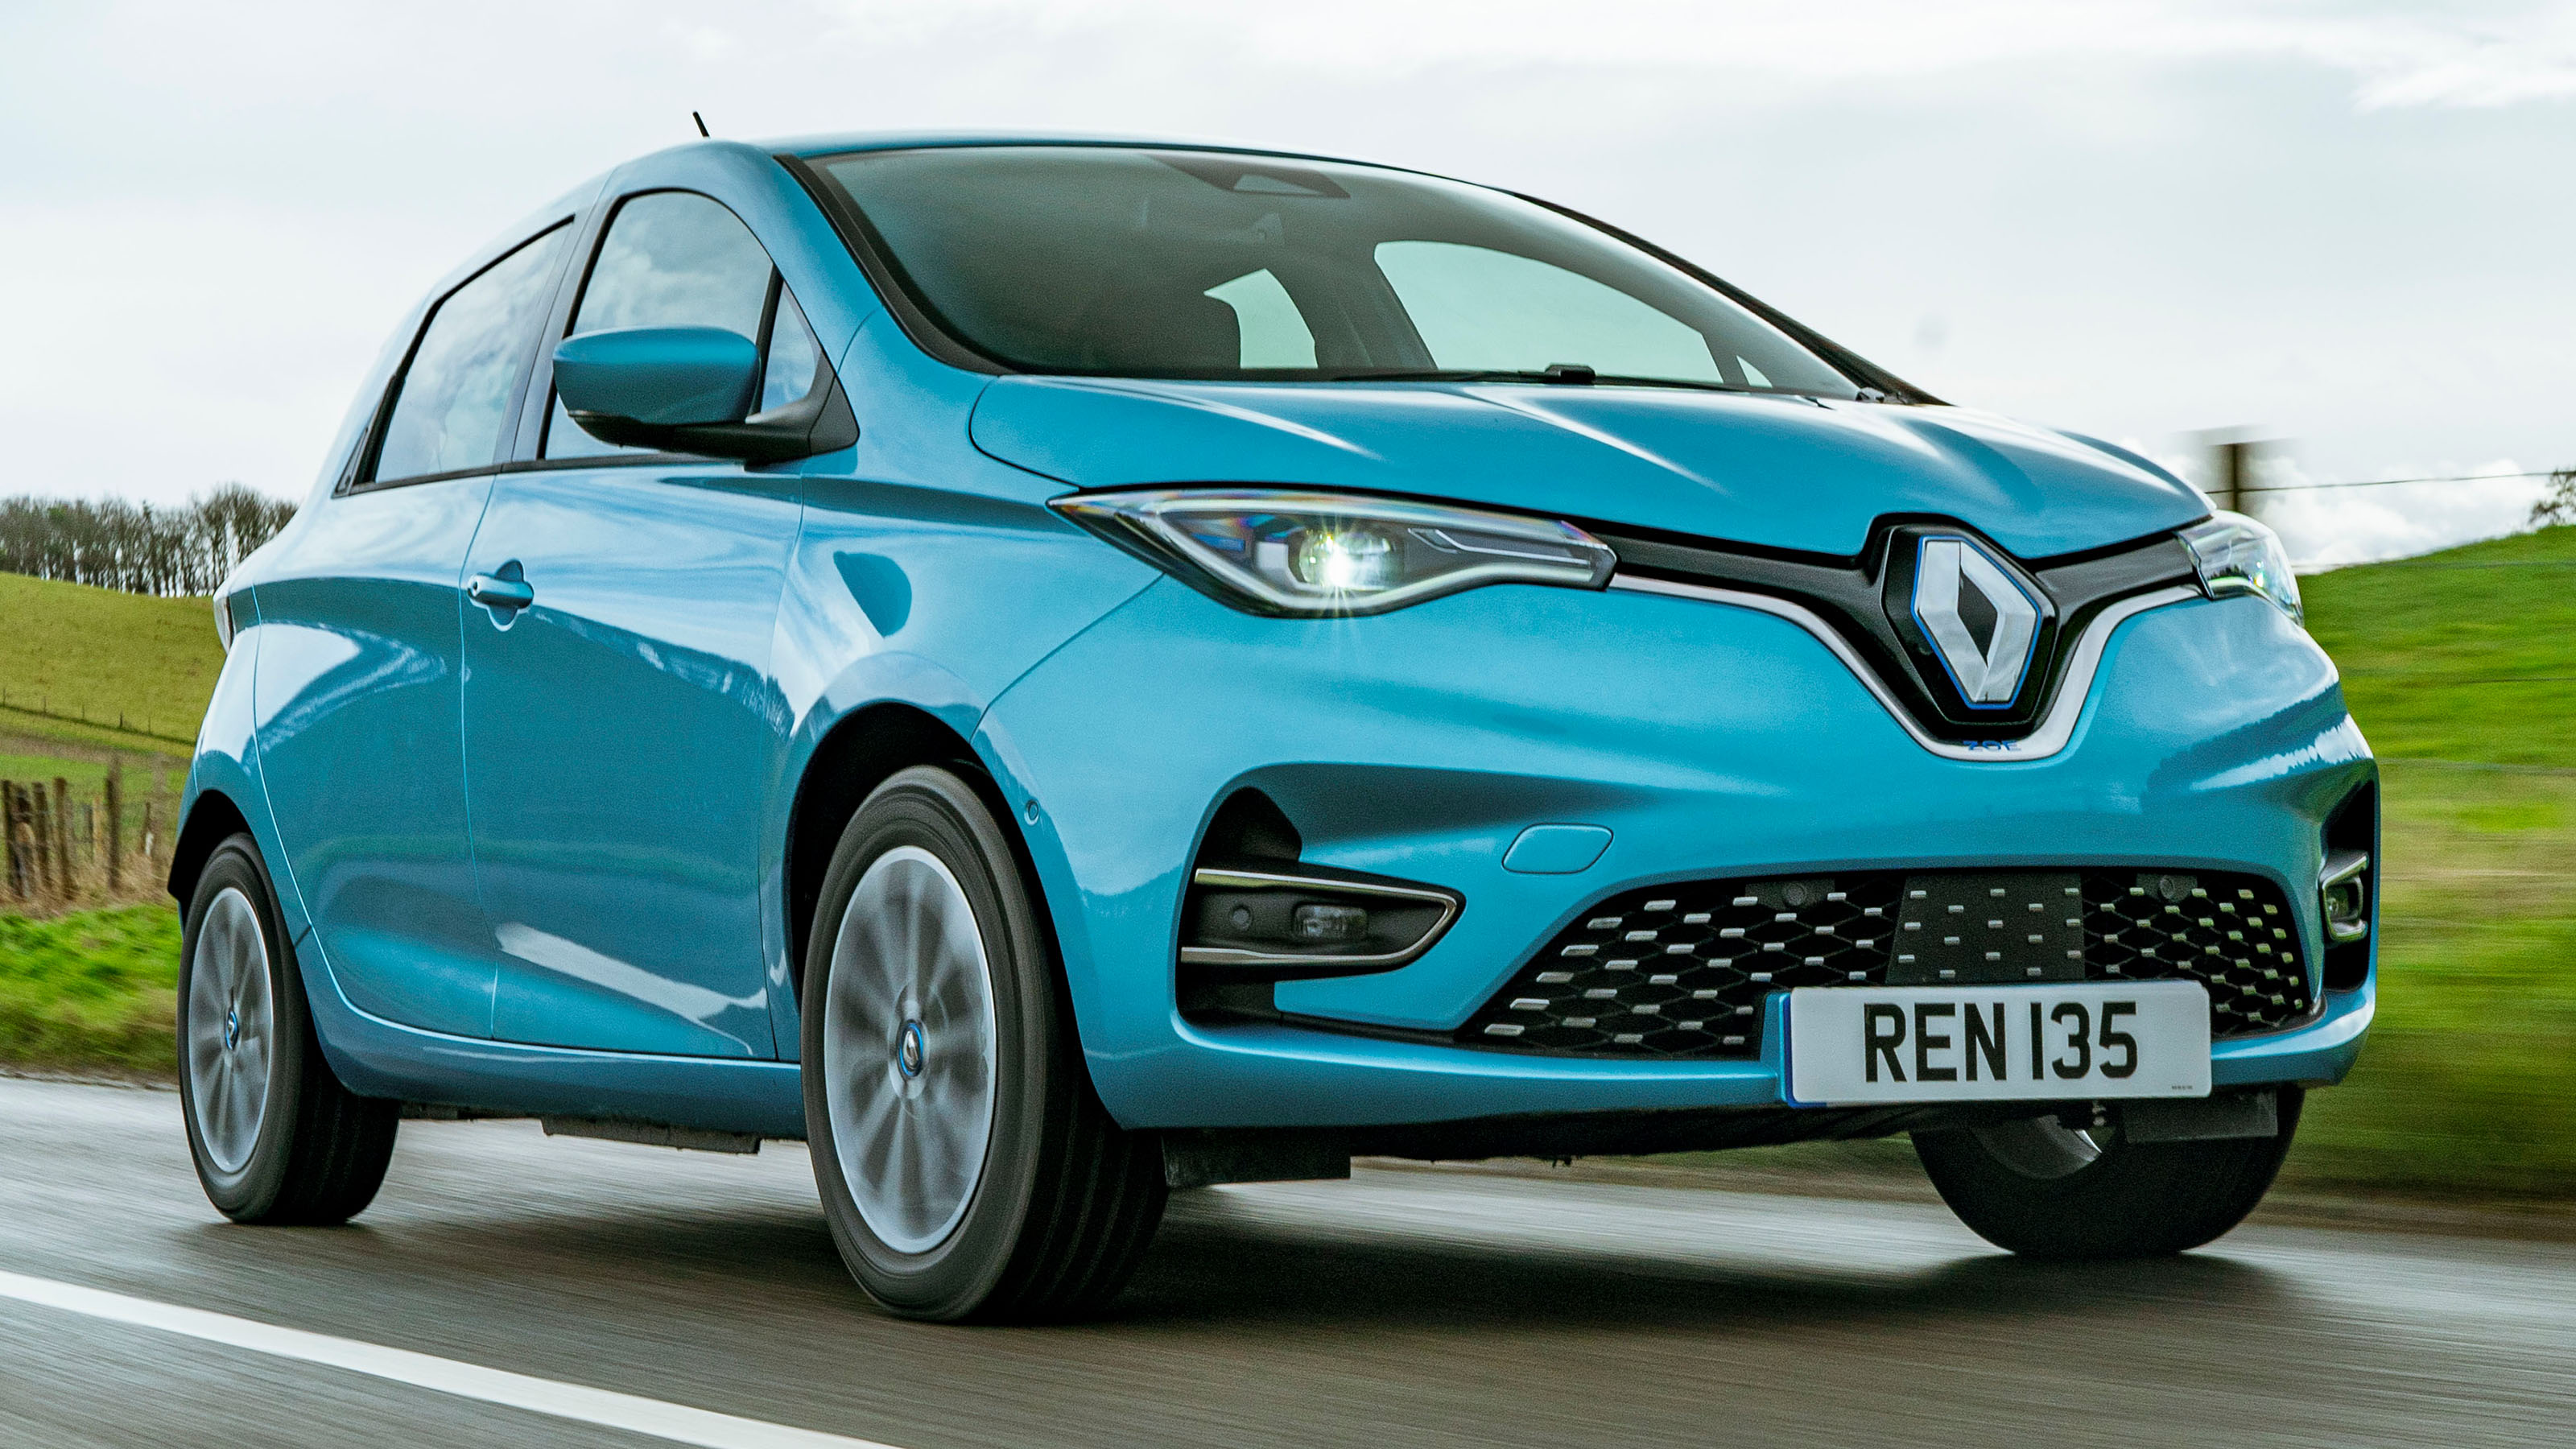 New ZOE recycled fabrics: nothing is lost - Renault Group